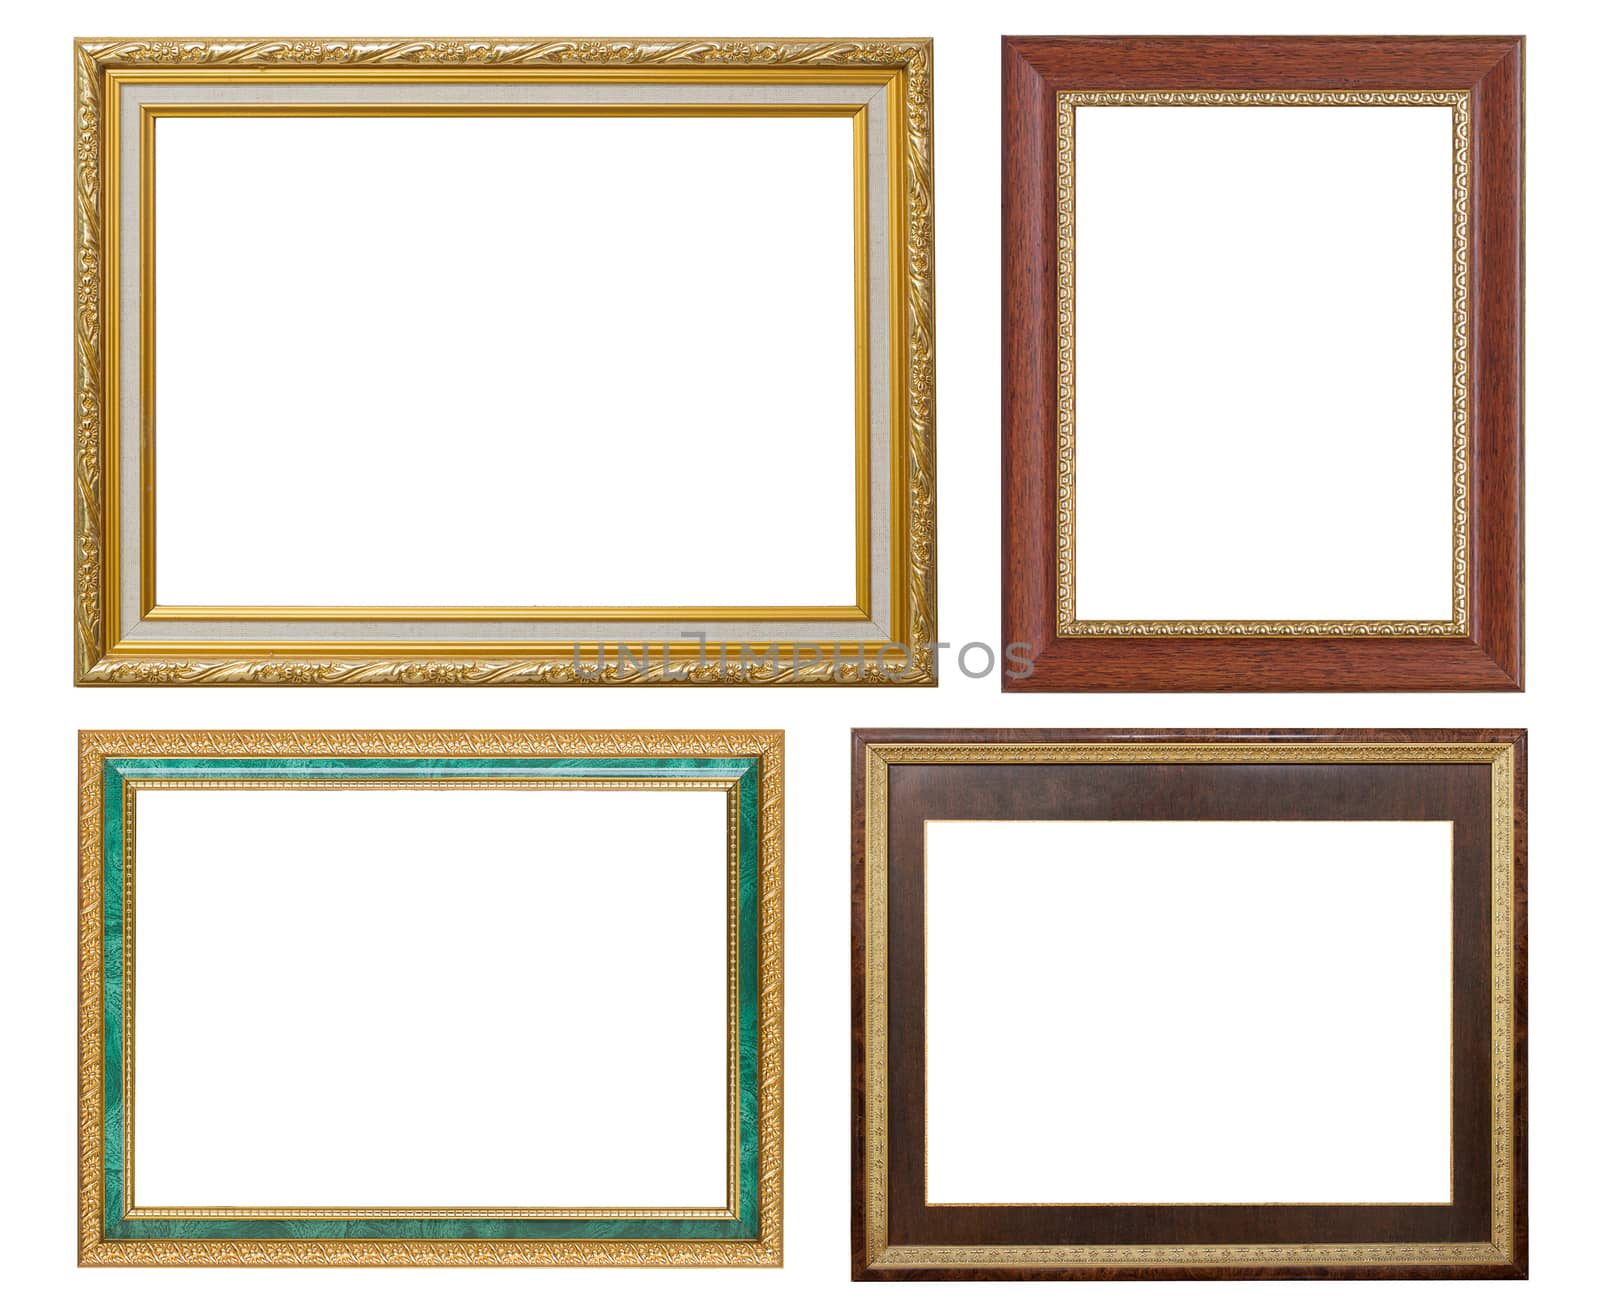 Set of golden frame and wood vintage isolated on white backgroun by jayzynism